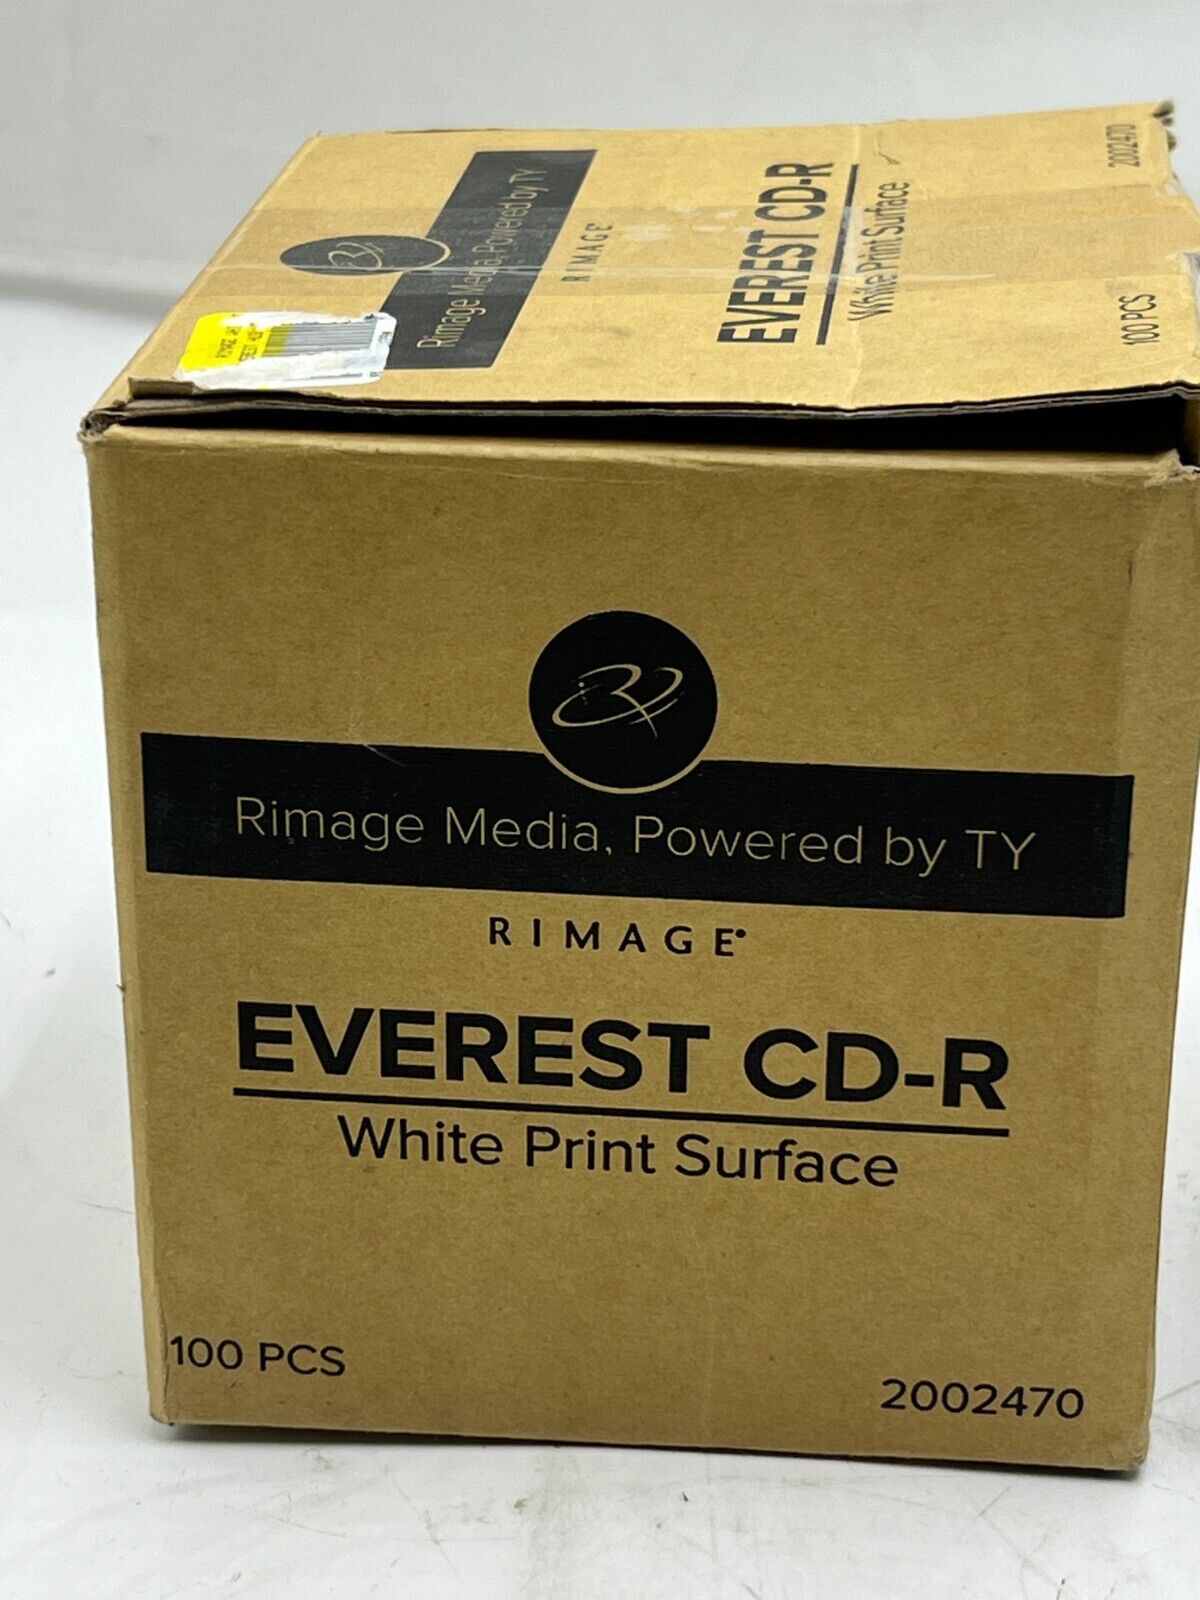 Box of 100 Rimage Media Everest CD-R White Print Surface 2002470 Durable